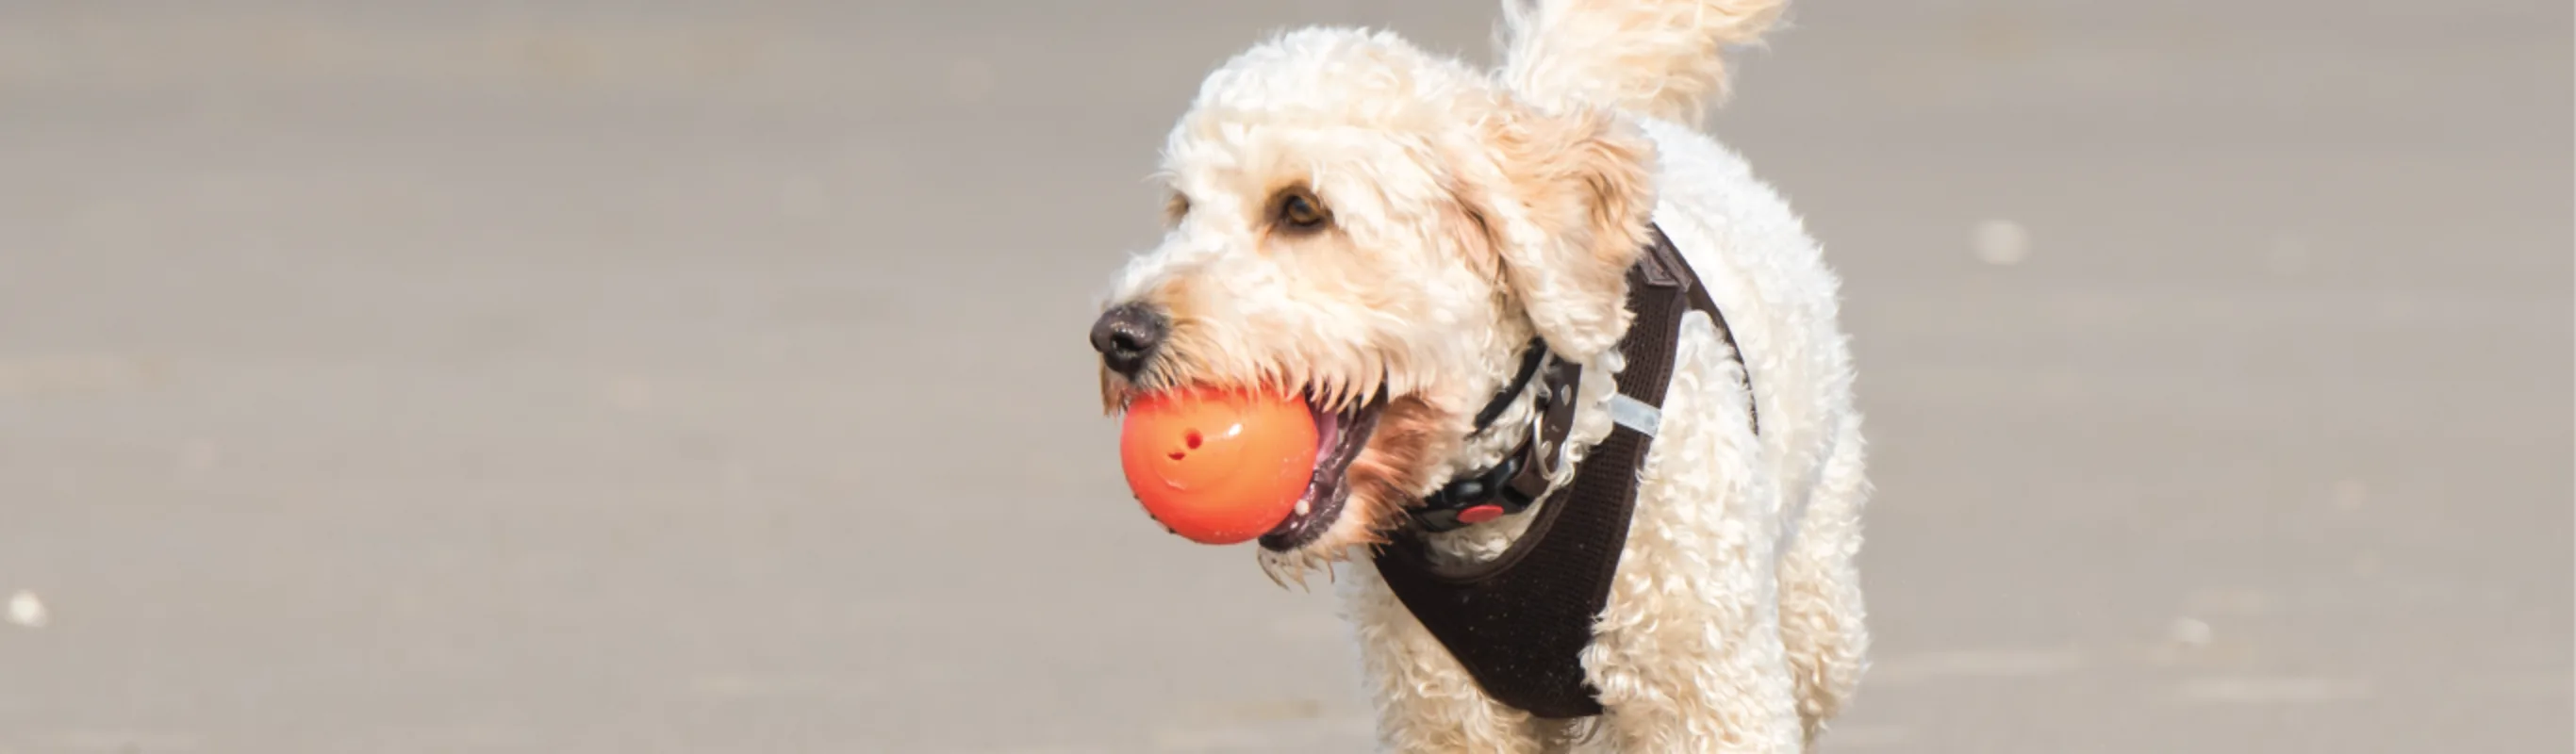 White Poodle is playing on a beach with an orange ball in its mouth. 